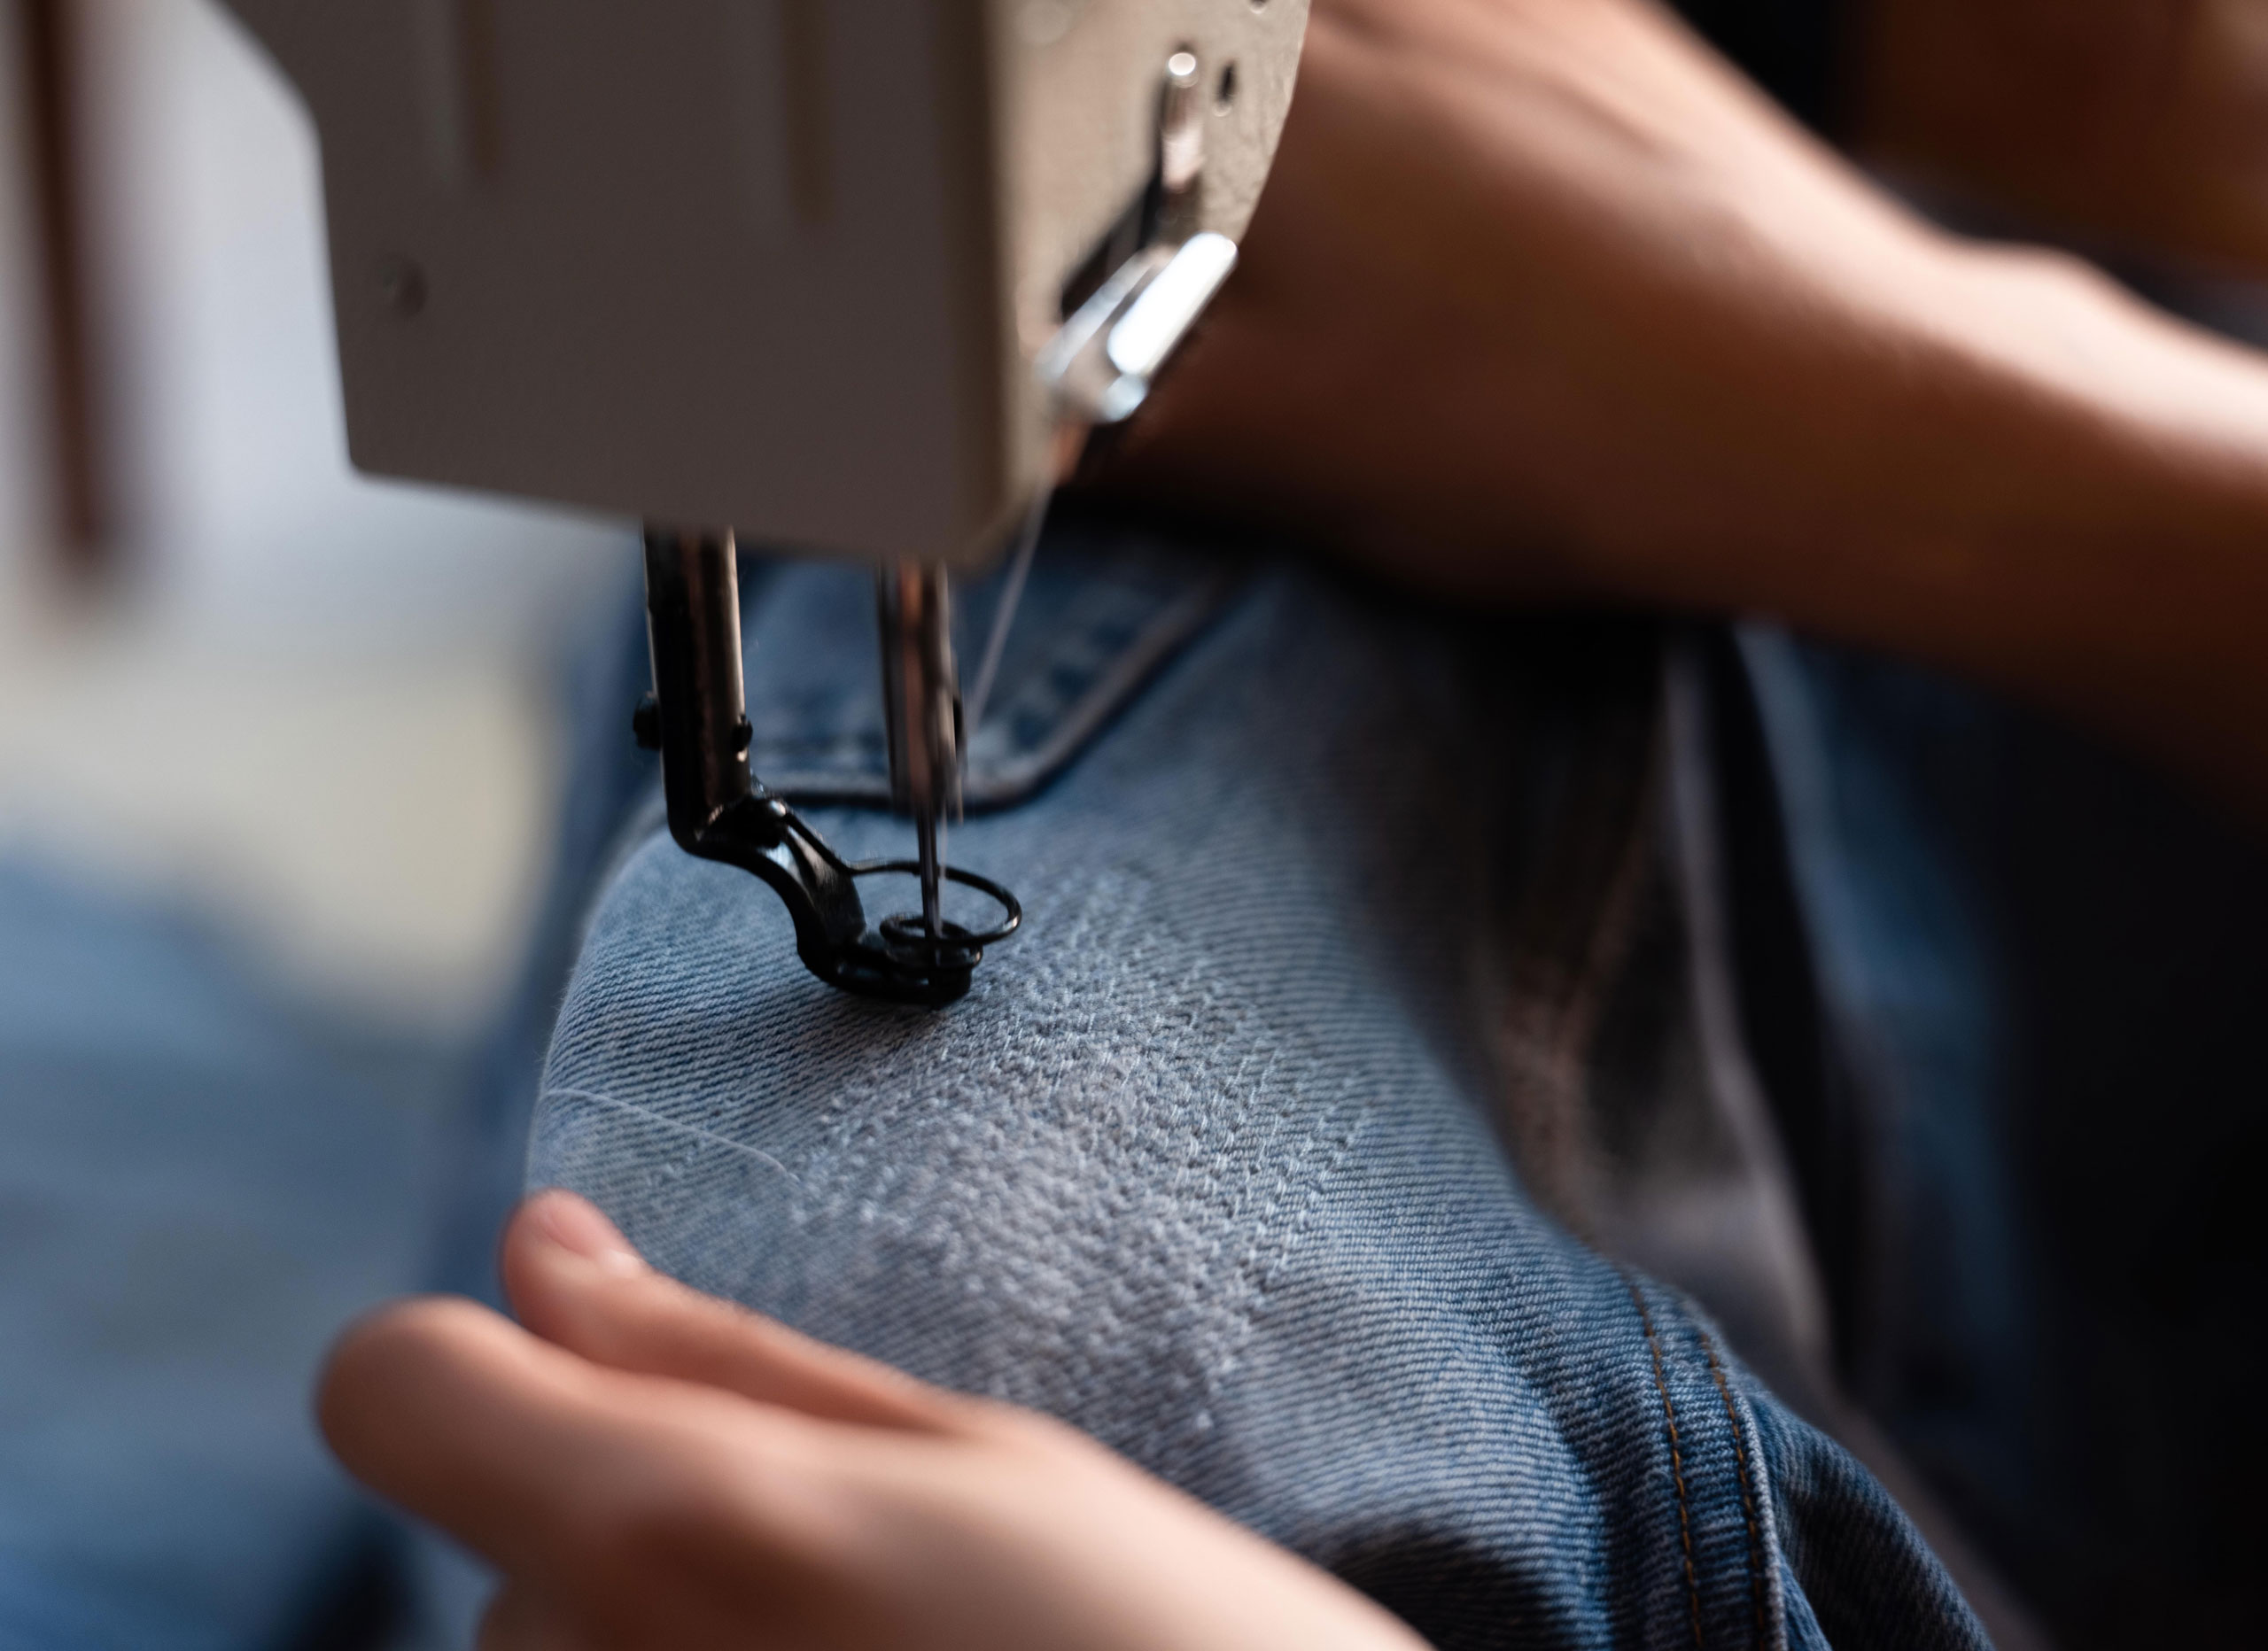 Denim Mills Show Confidence In Recycled Fibers but Will Brands Follow?